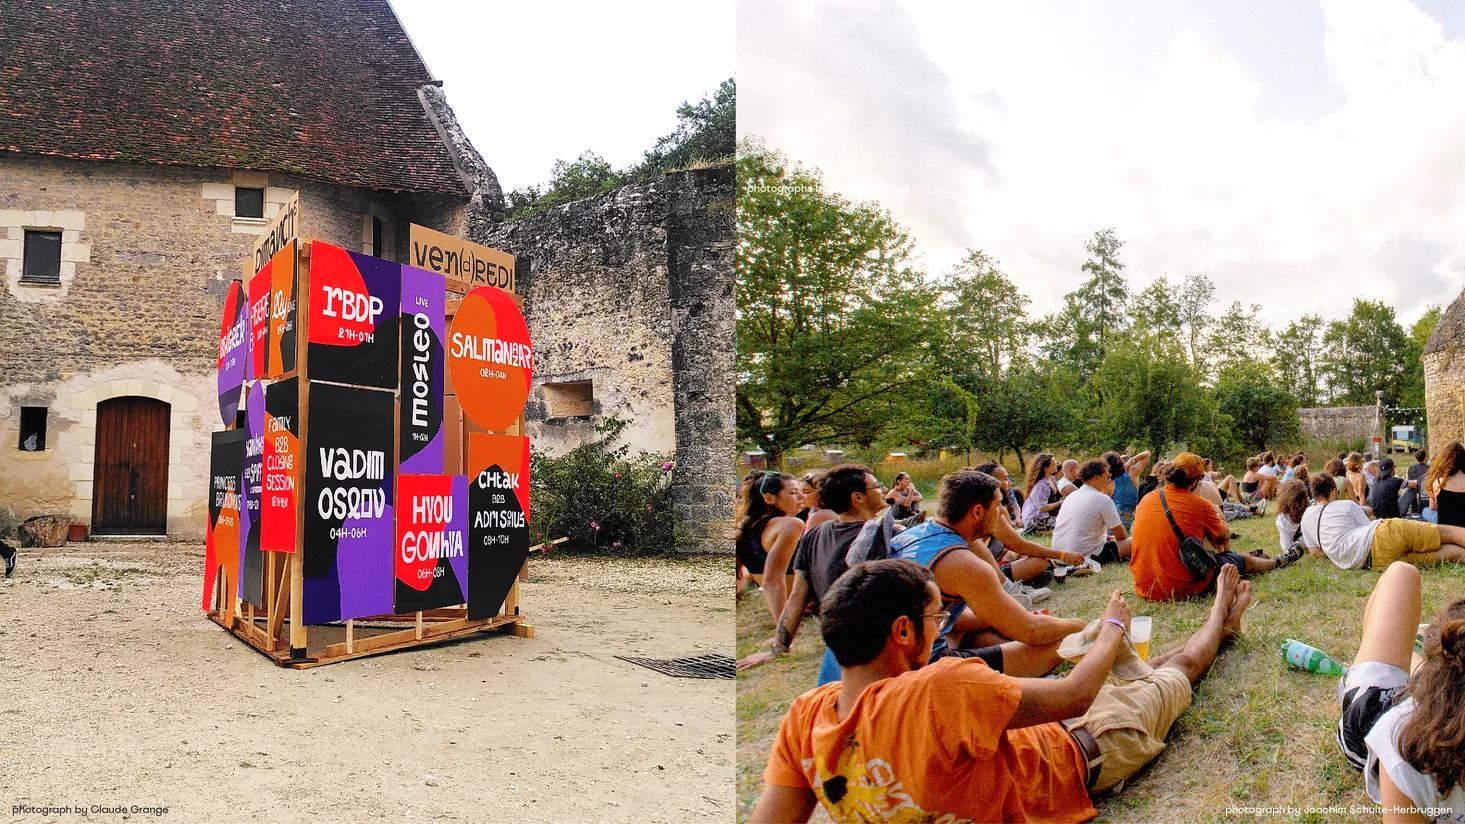 a photograph of Dissociate festival 2023's timetable painted on a wooden structure and a photograph of a crowd sitting on grass